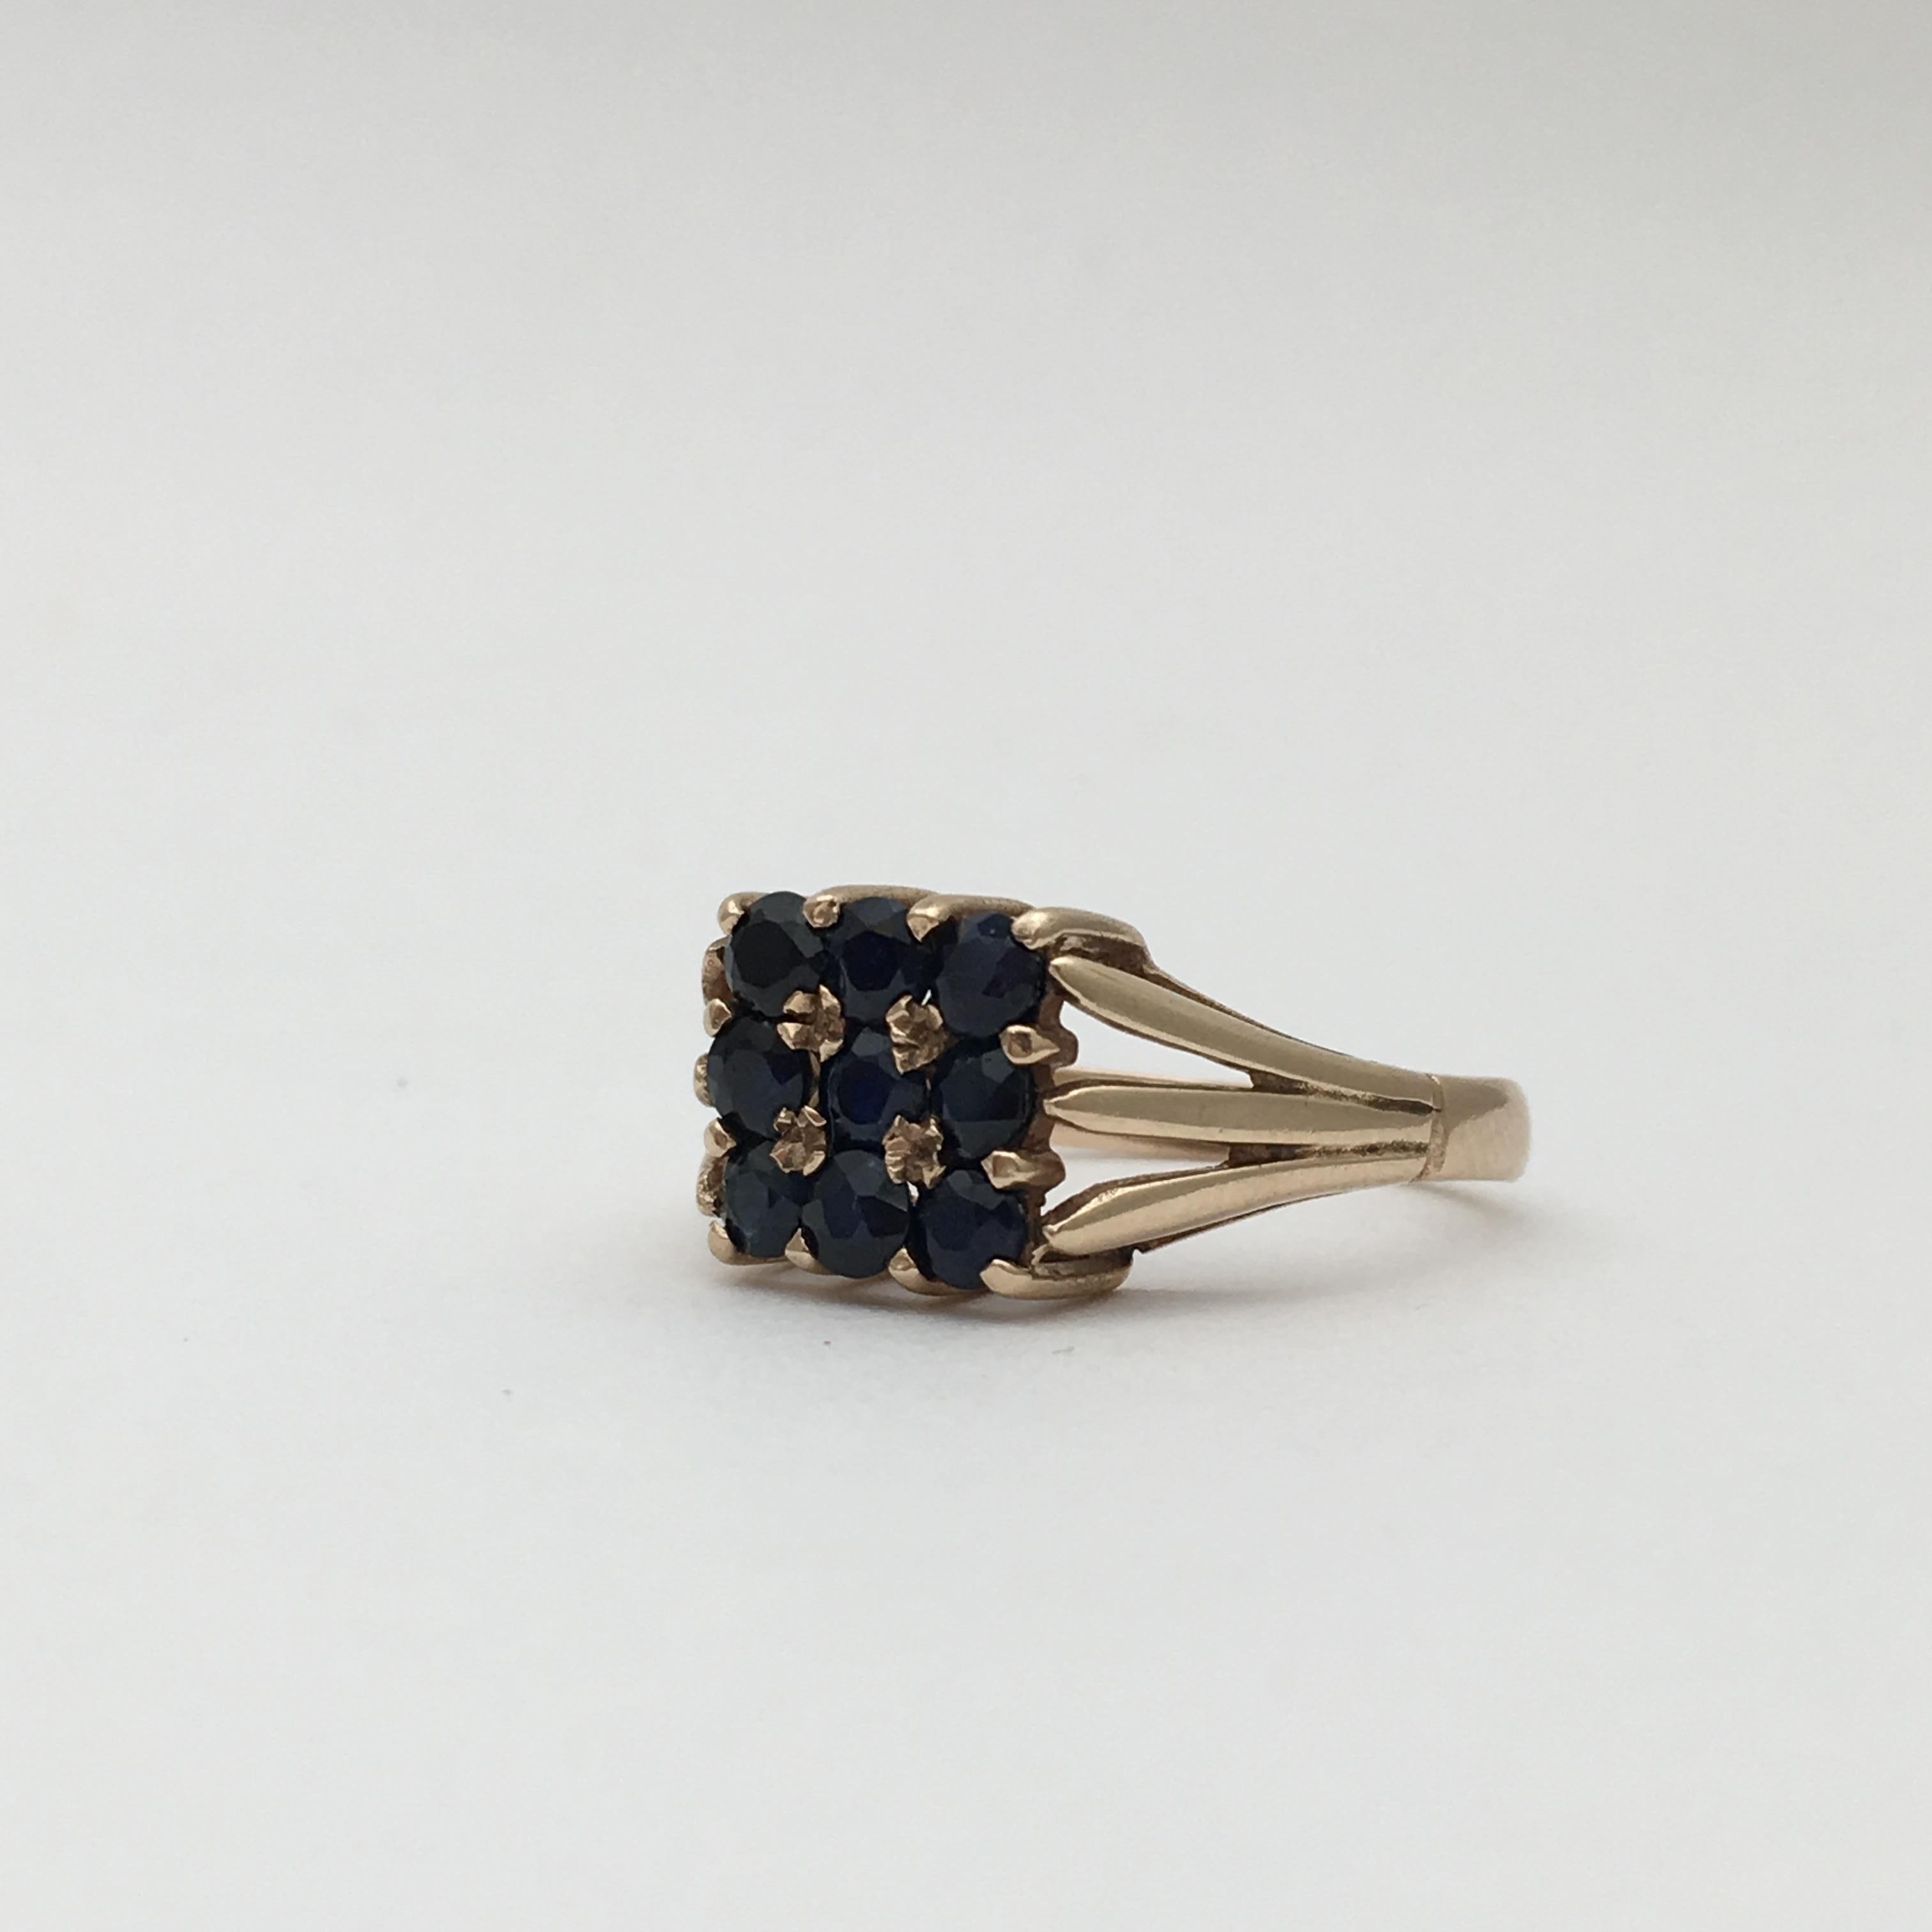 Gold Vintage Jewelry Sapphire Gemstone Square Cluster Ring 1970s Dark Blue For Sale 2